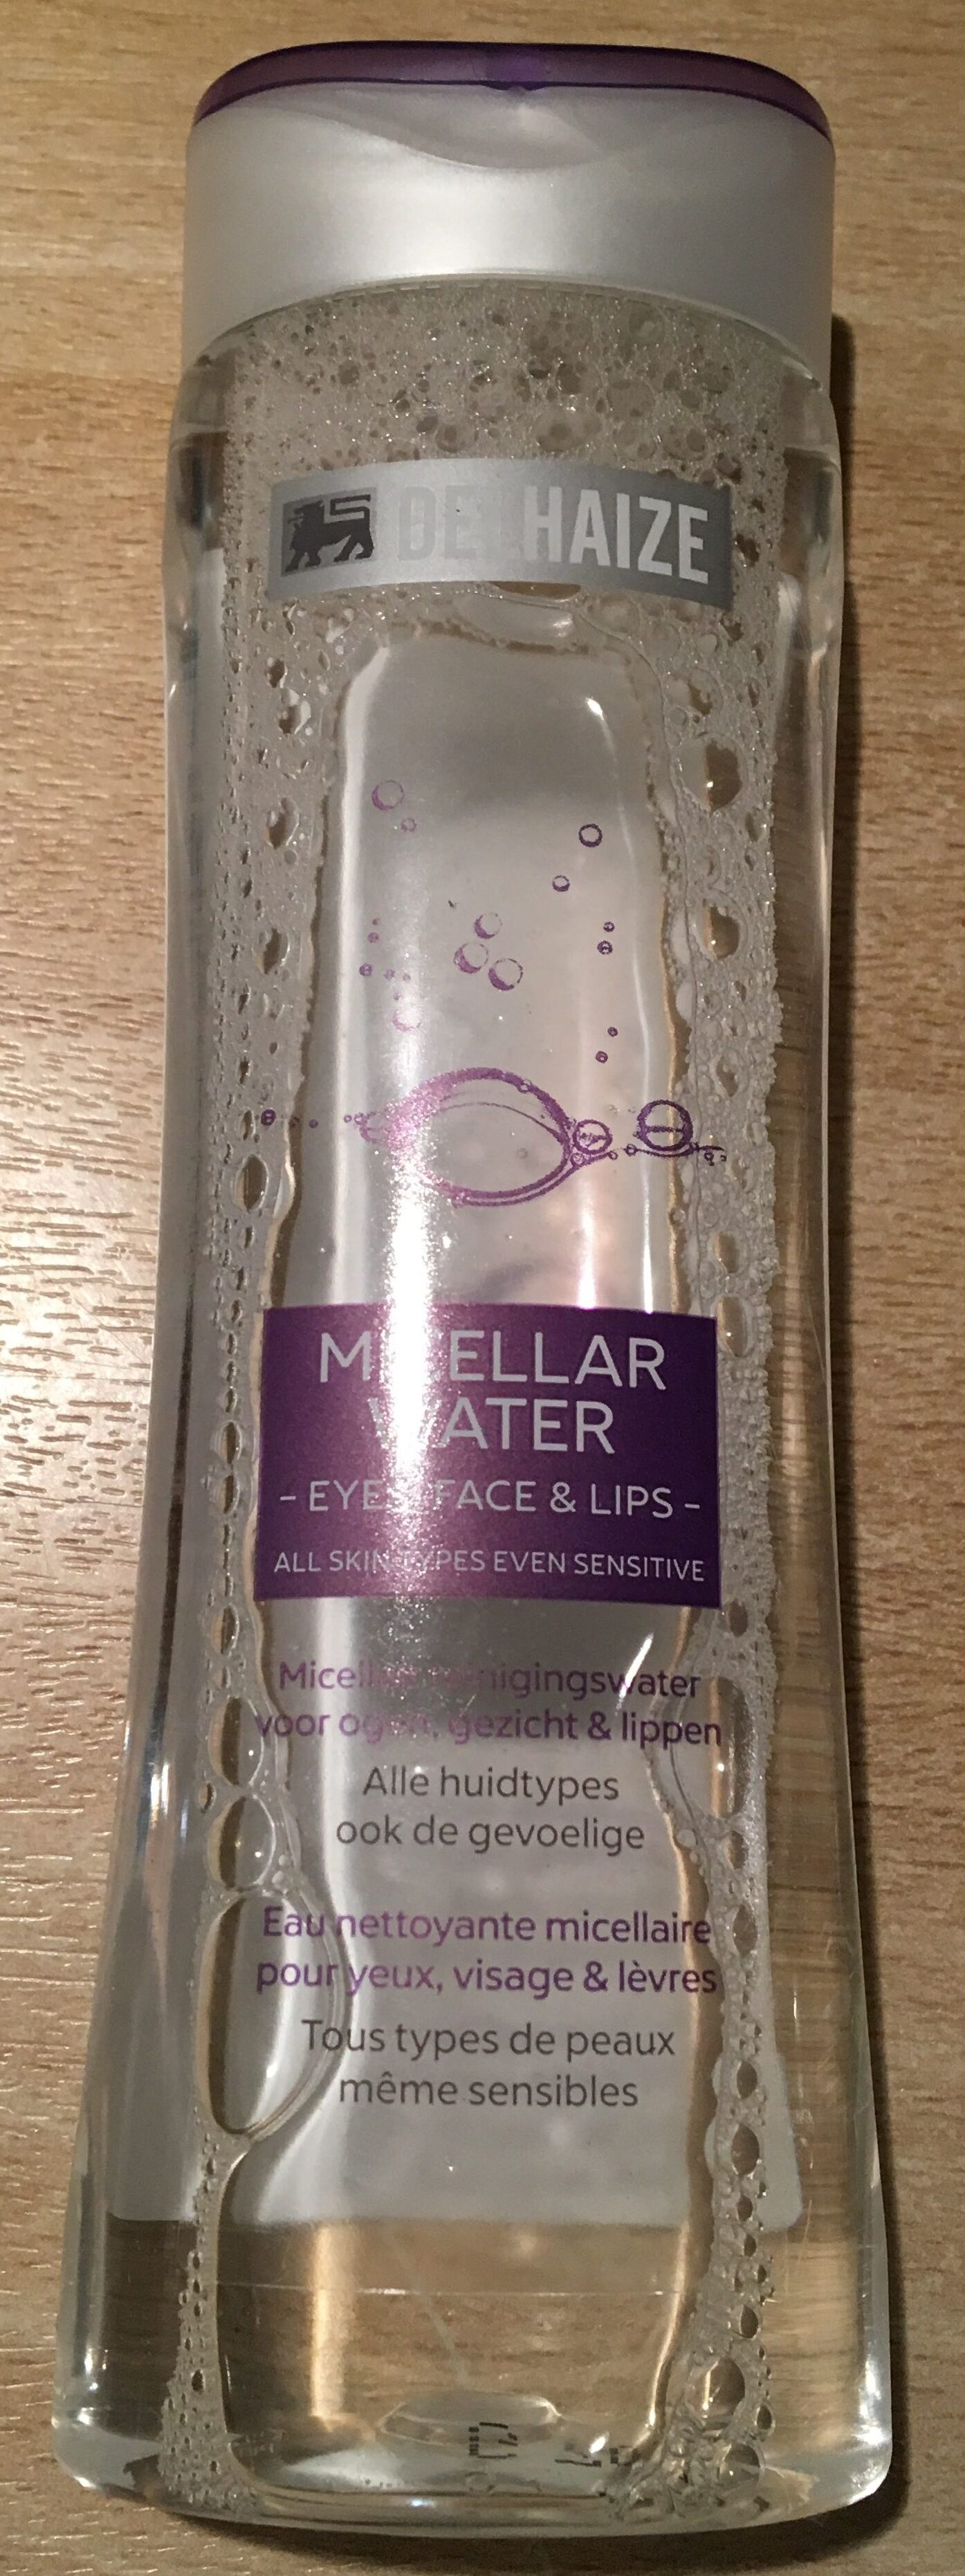 Micellar water eyes face & lips - Product - fr